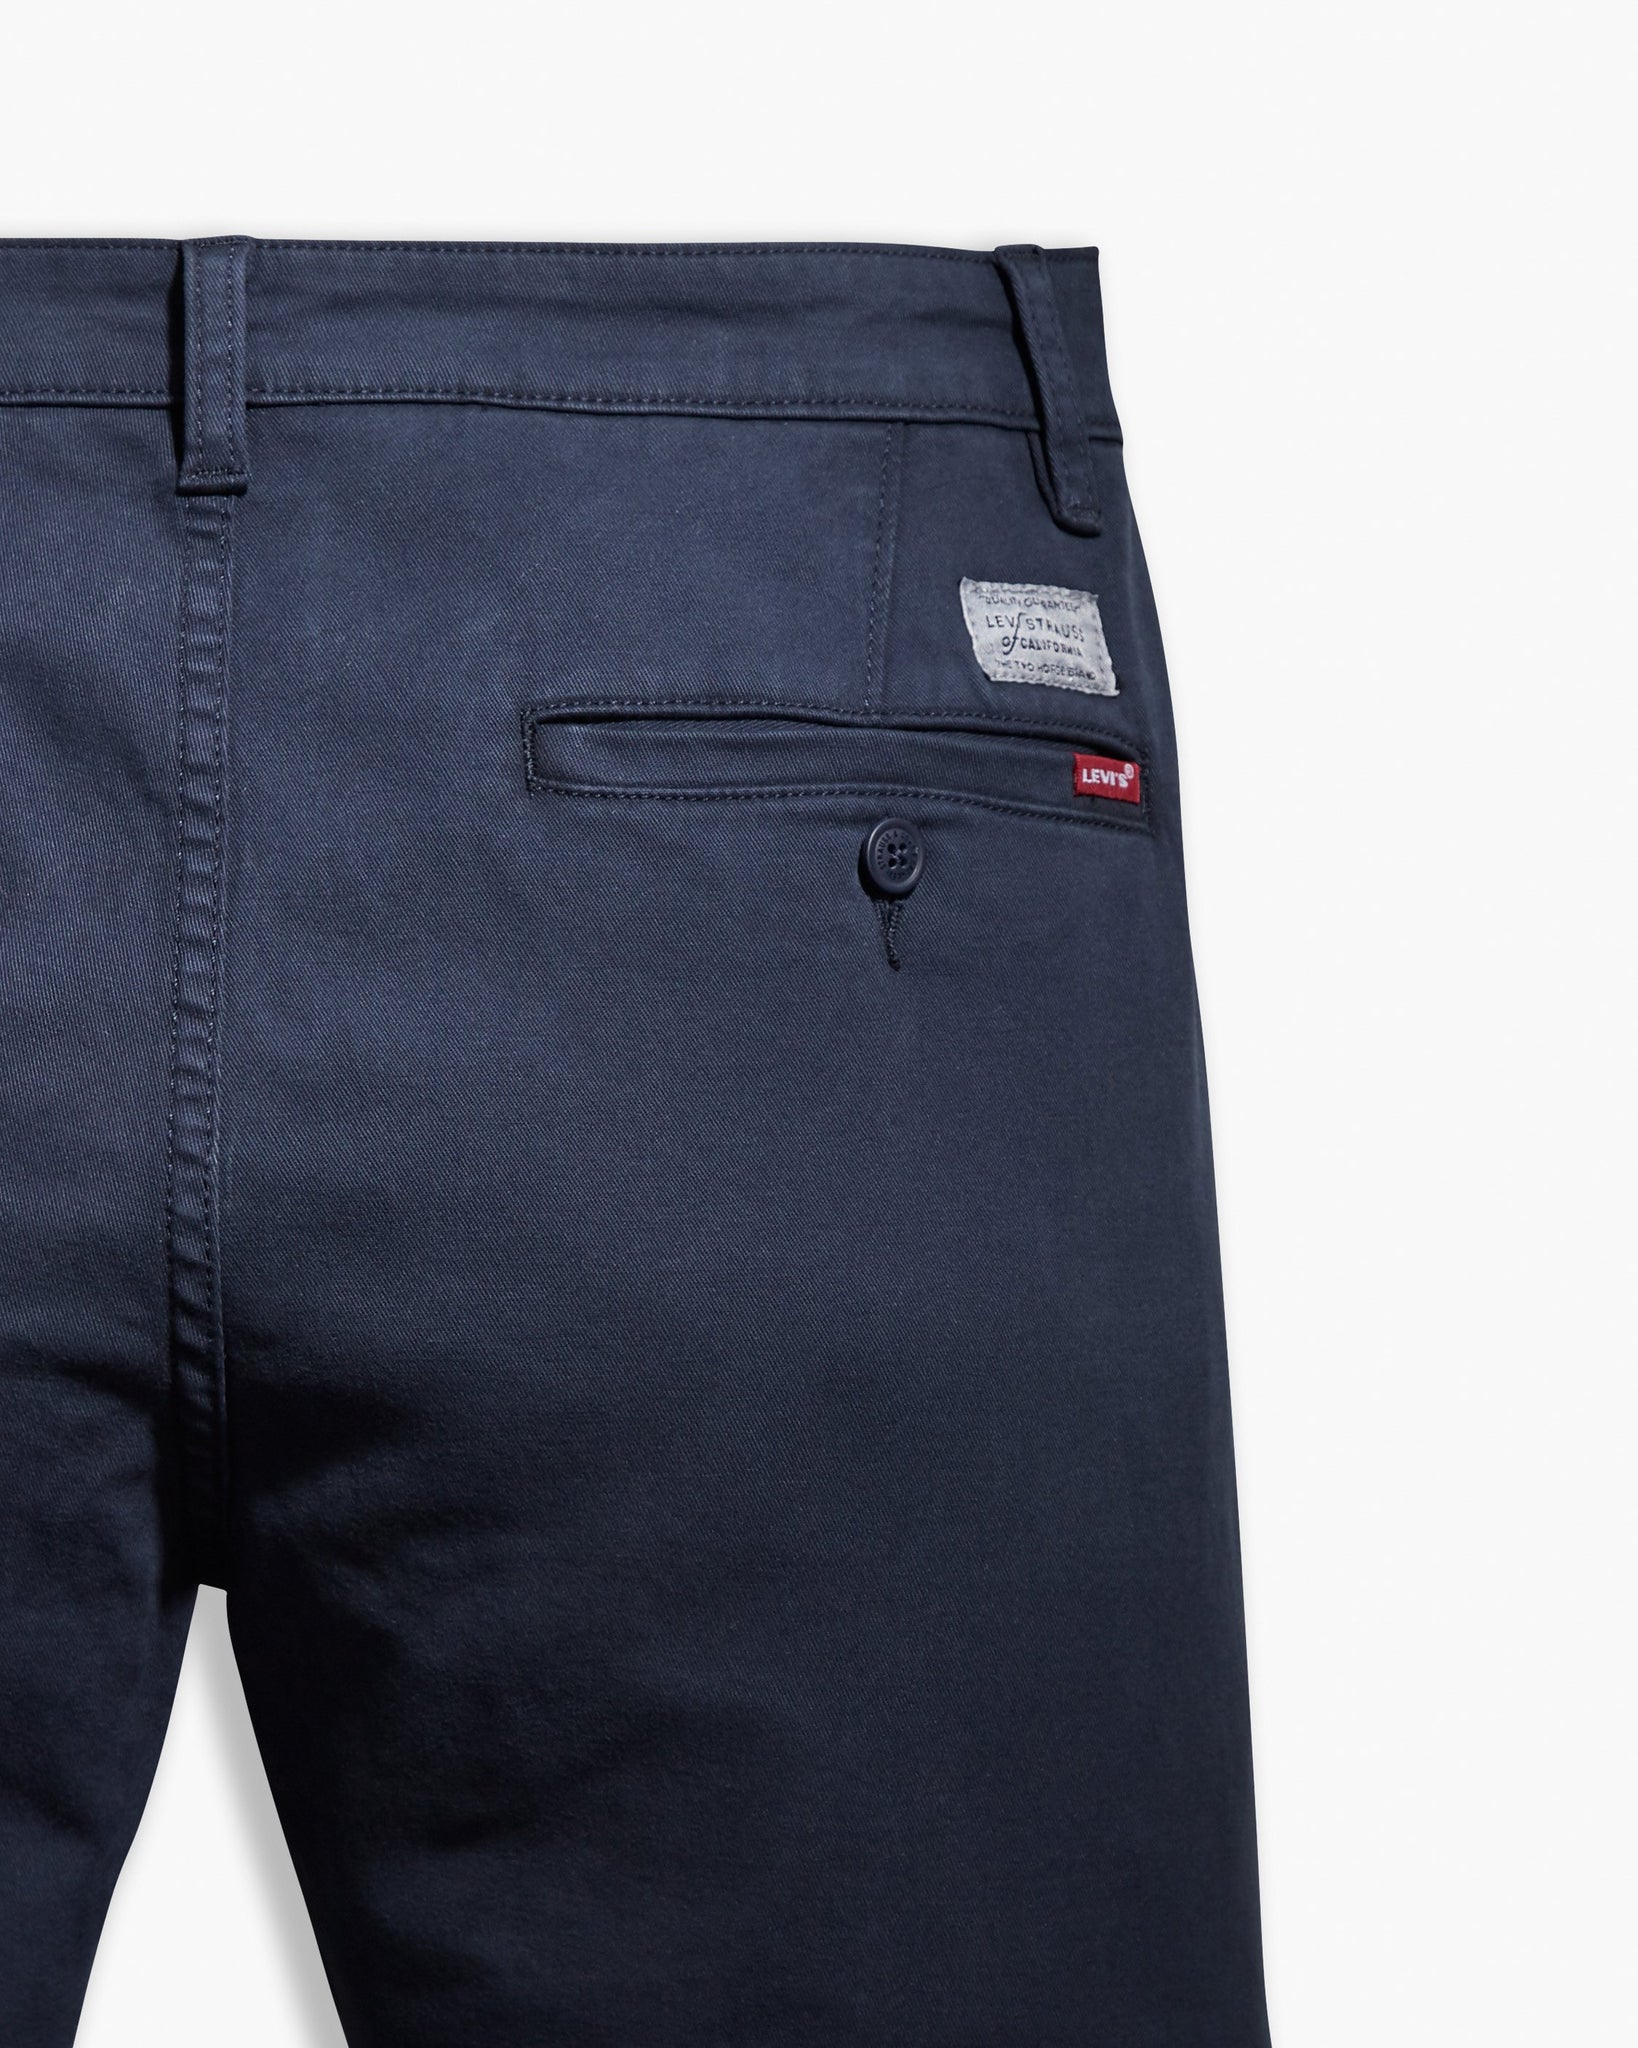 Levi's® XX Chino Standard Taper Fit Mens Chinos - Baltic Navy Shady